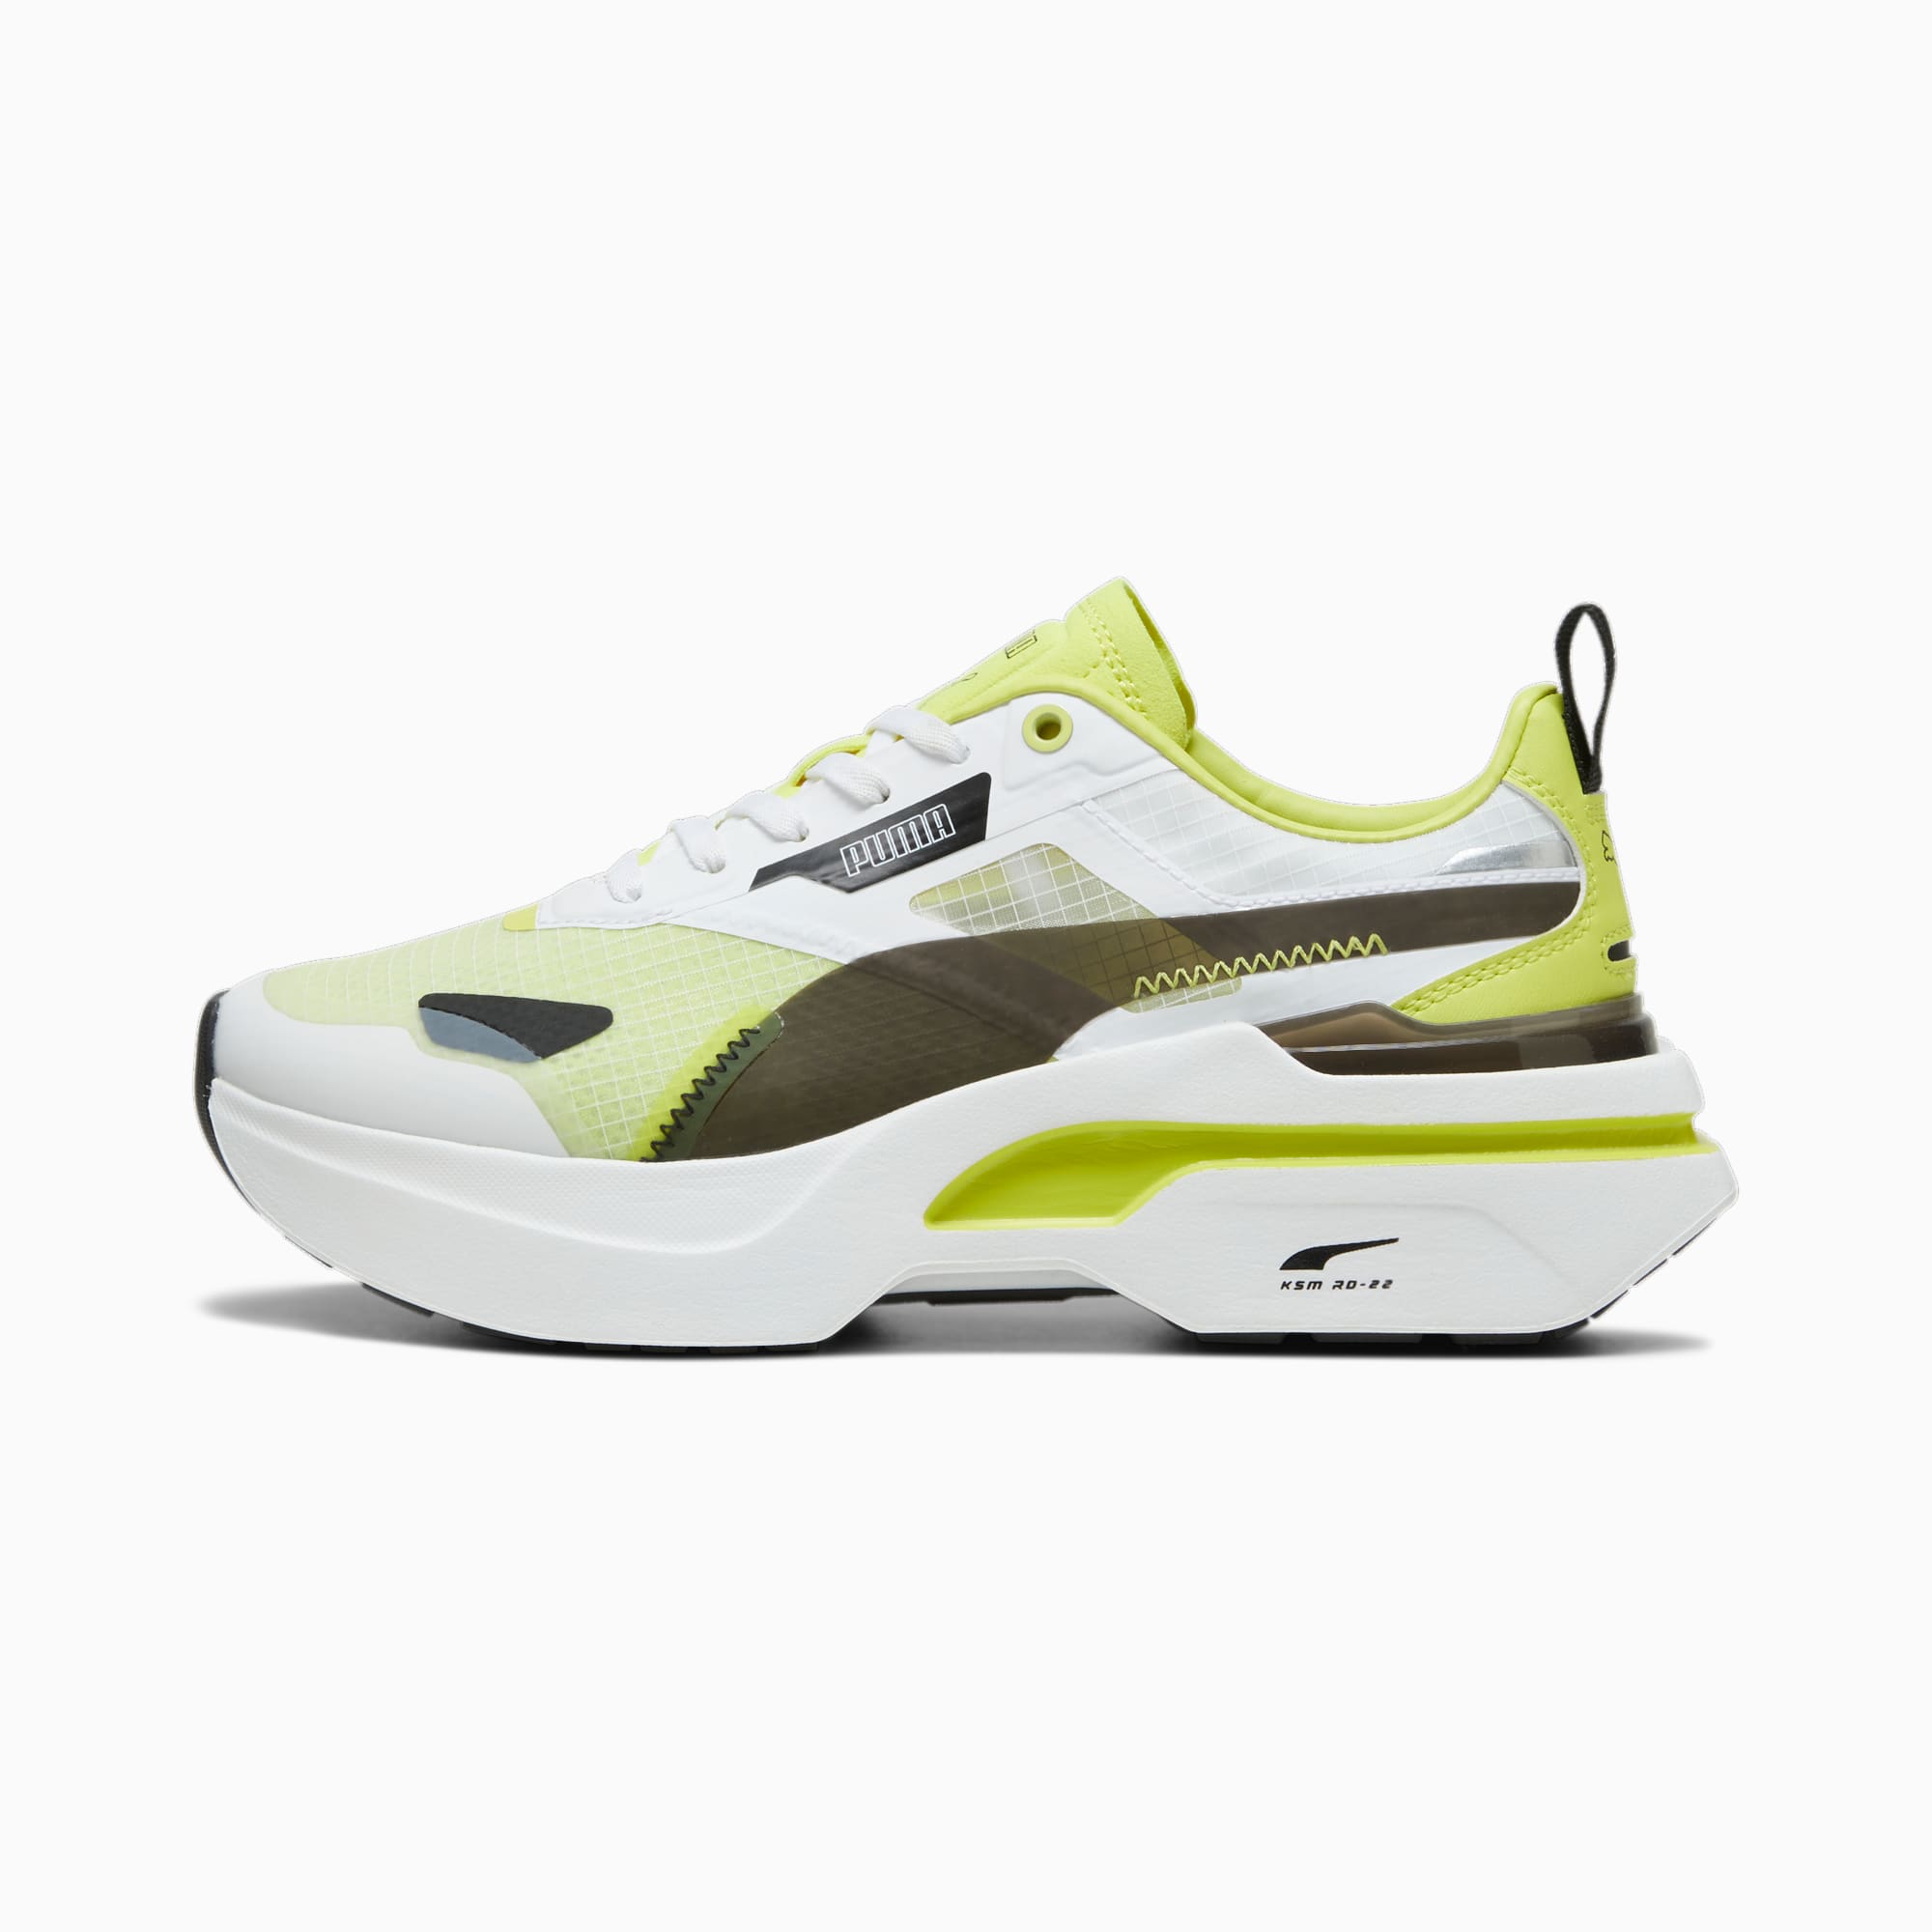 PUMA Kosmo Rider Women's Trainers, White/Lime Sheen, Size 42,5, Shoes